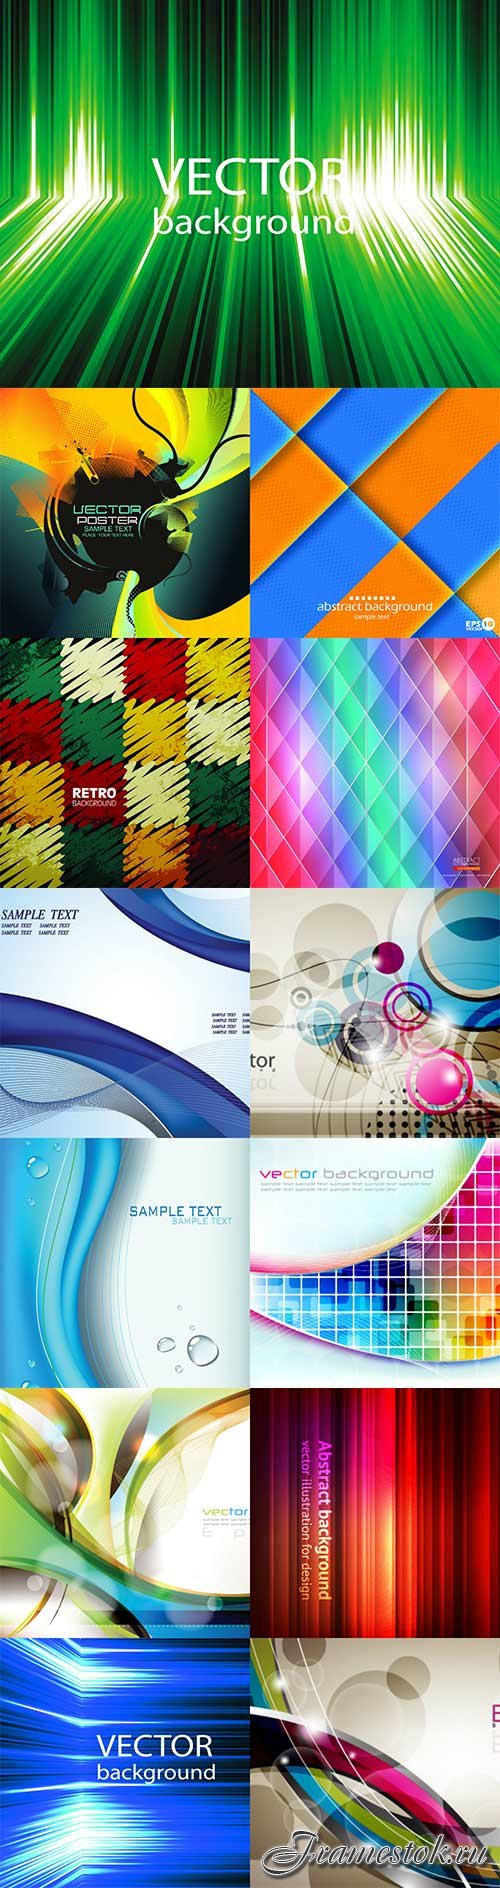 Bright colorful abstract backgrounds vector - 60